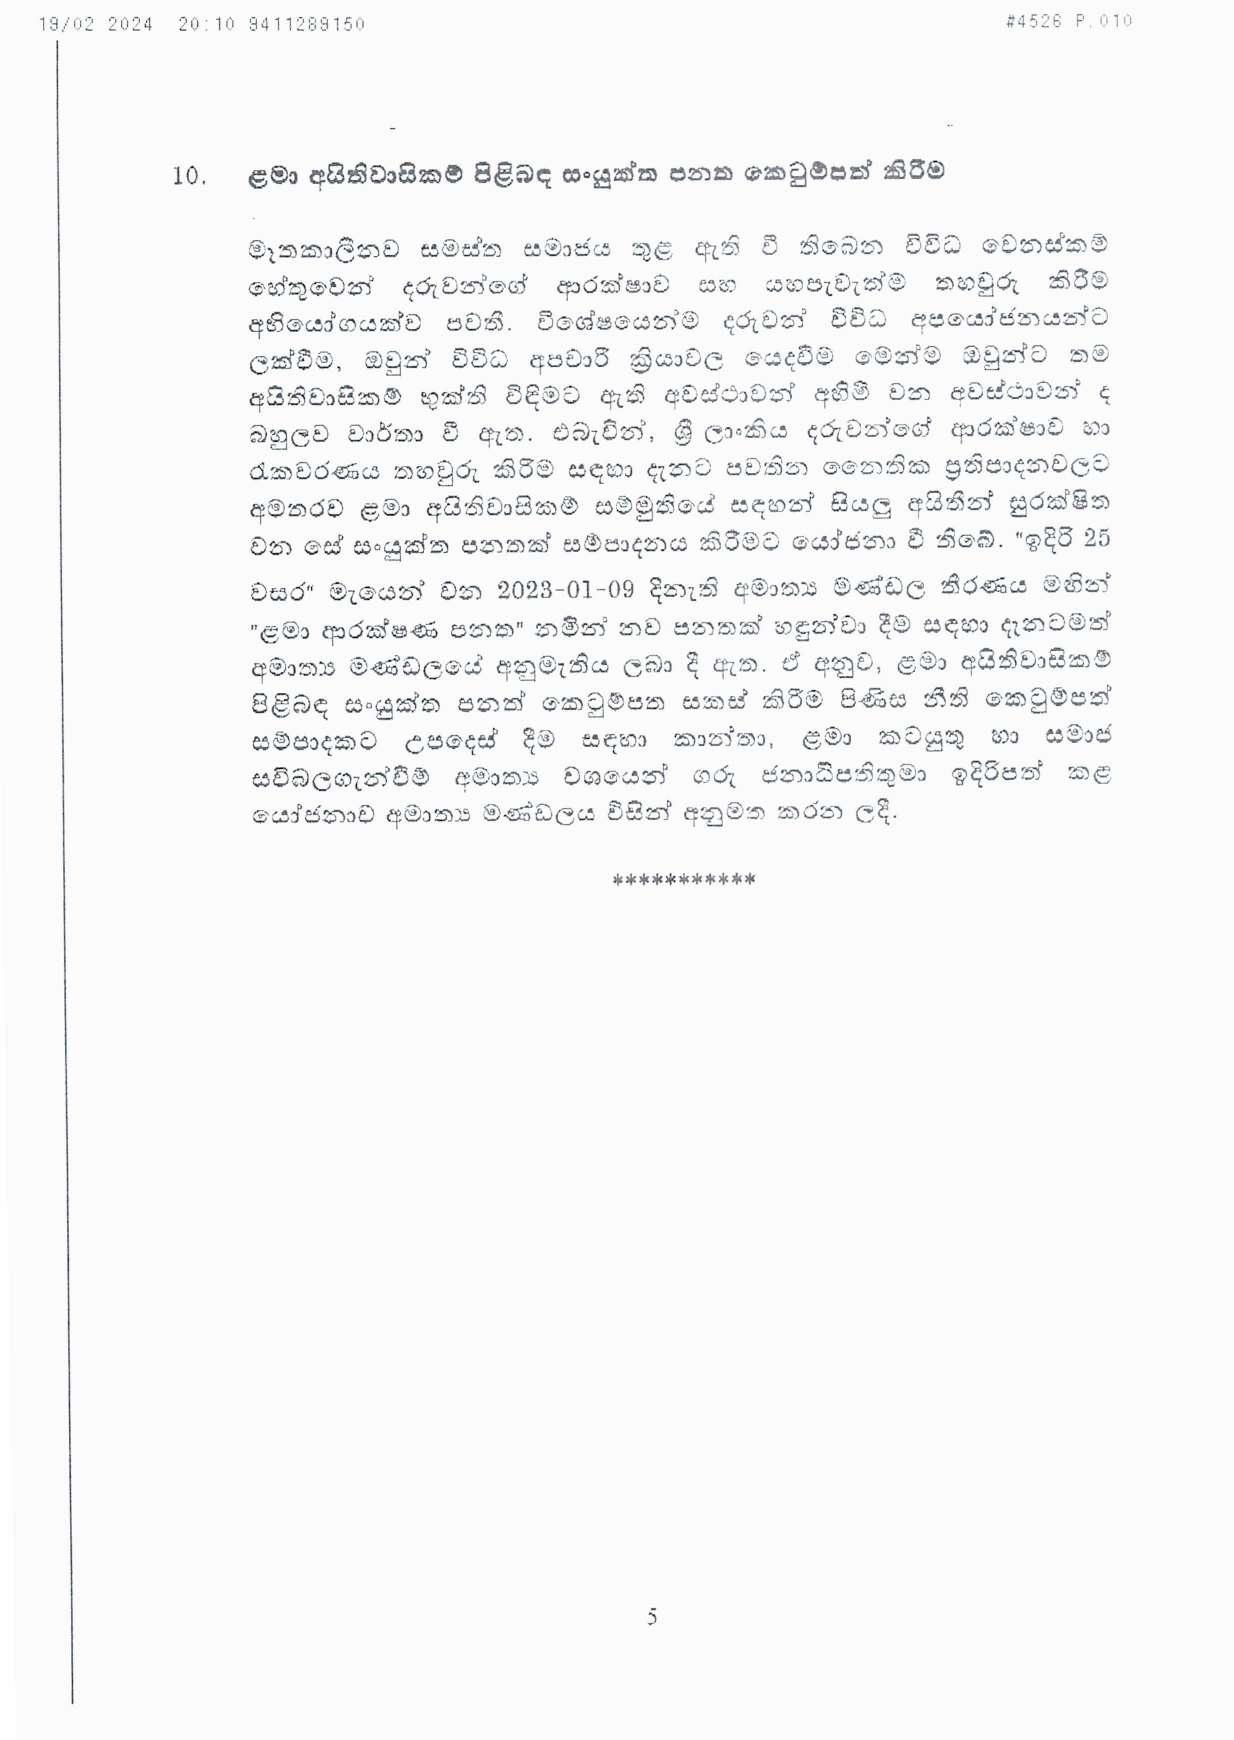 Cabinet Decisions on 19.02.2024 page 005